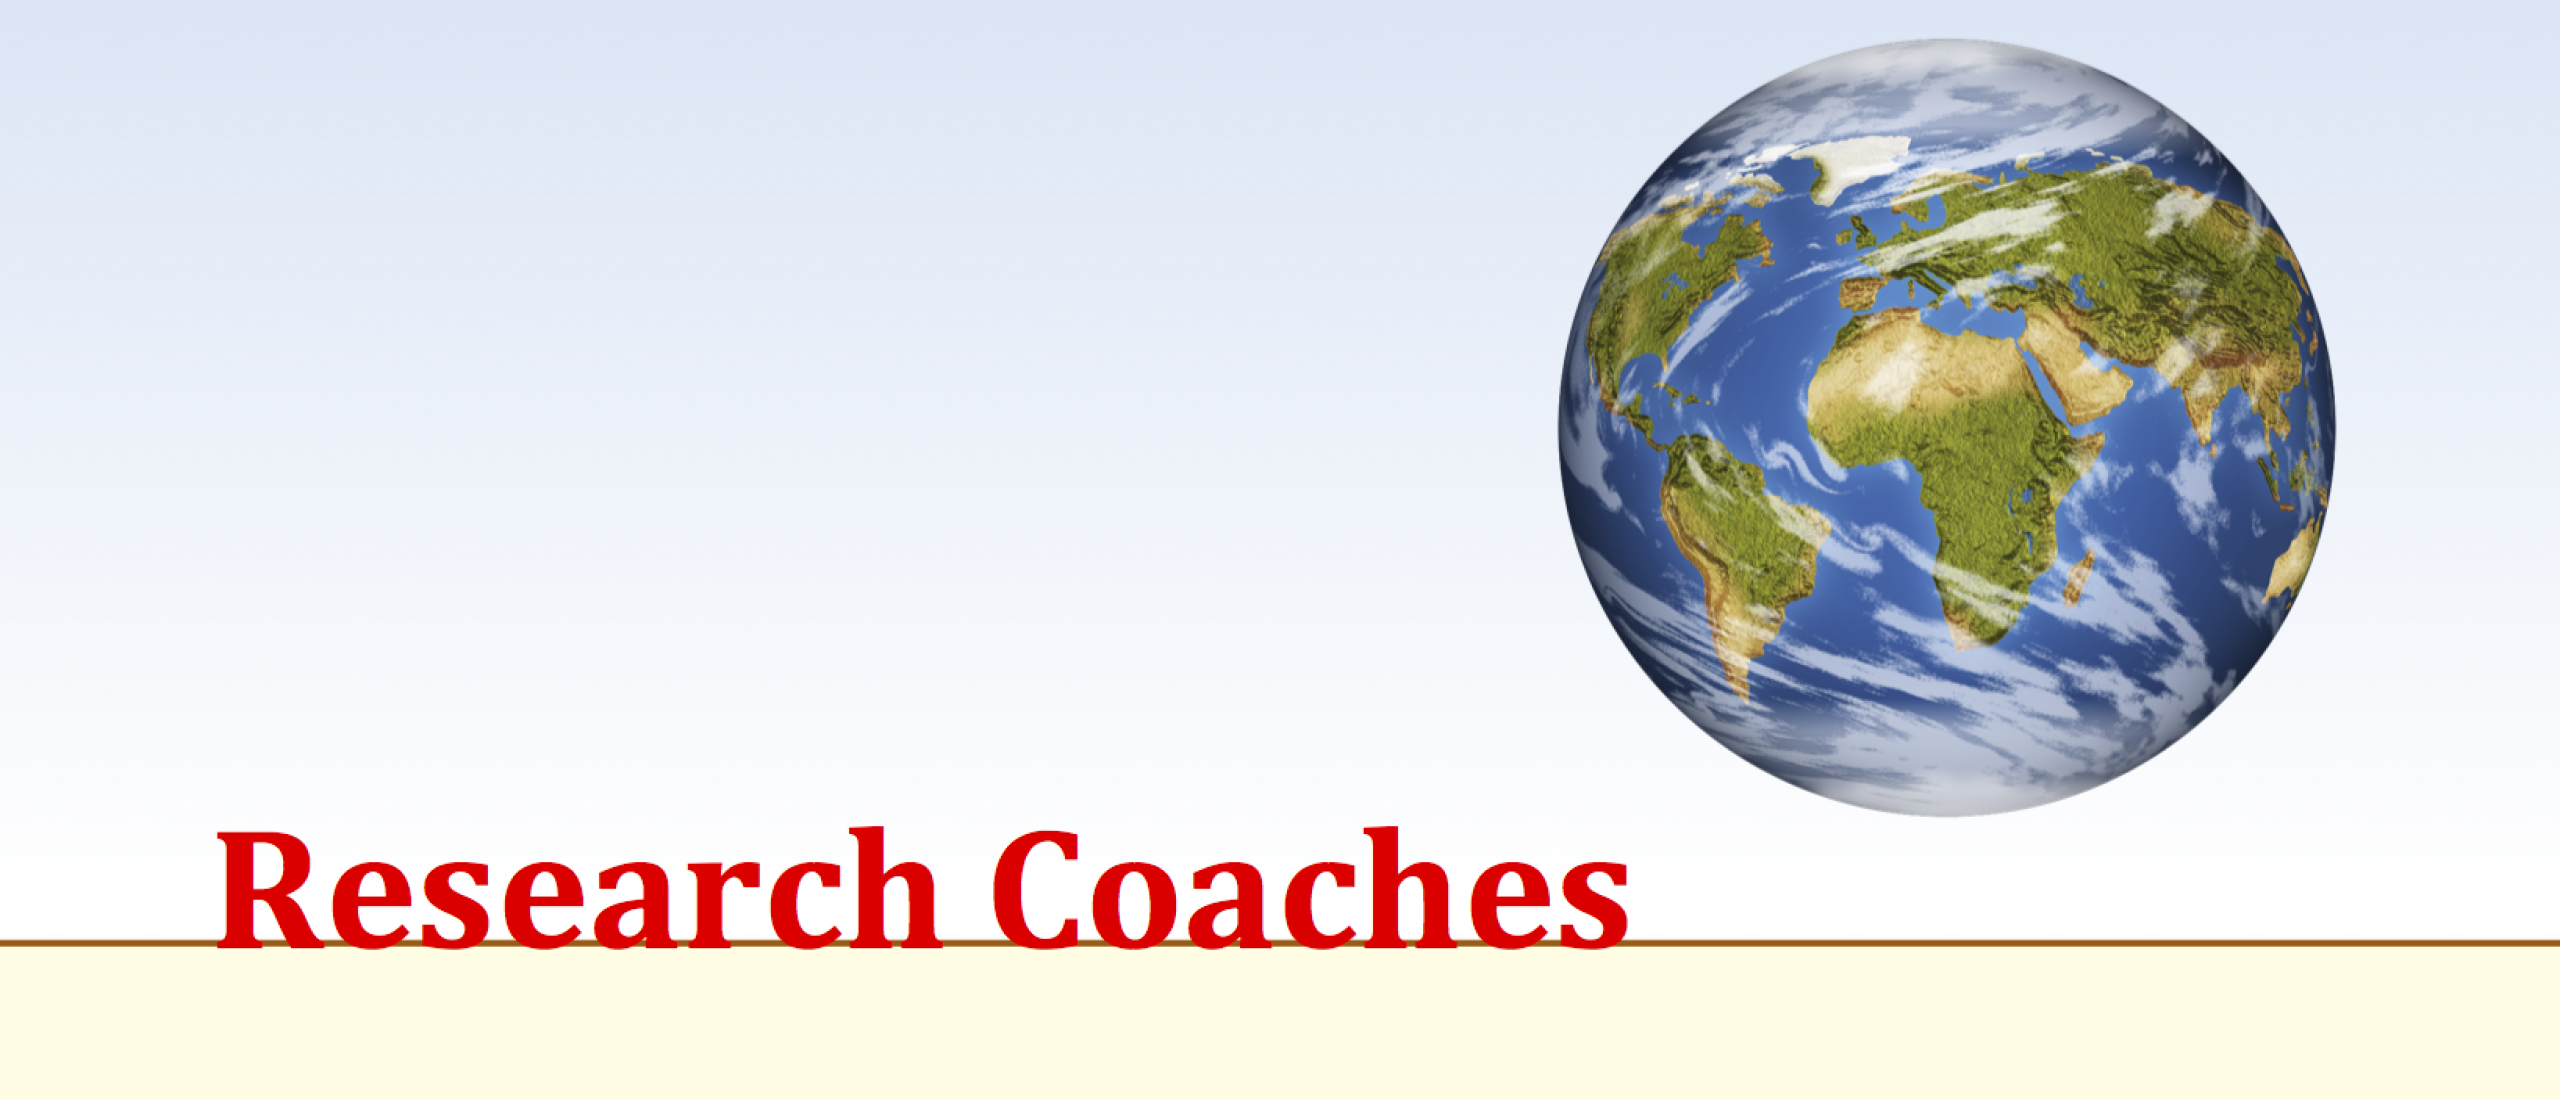 Research Coaches World Wide